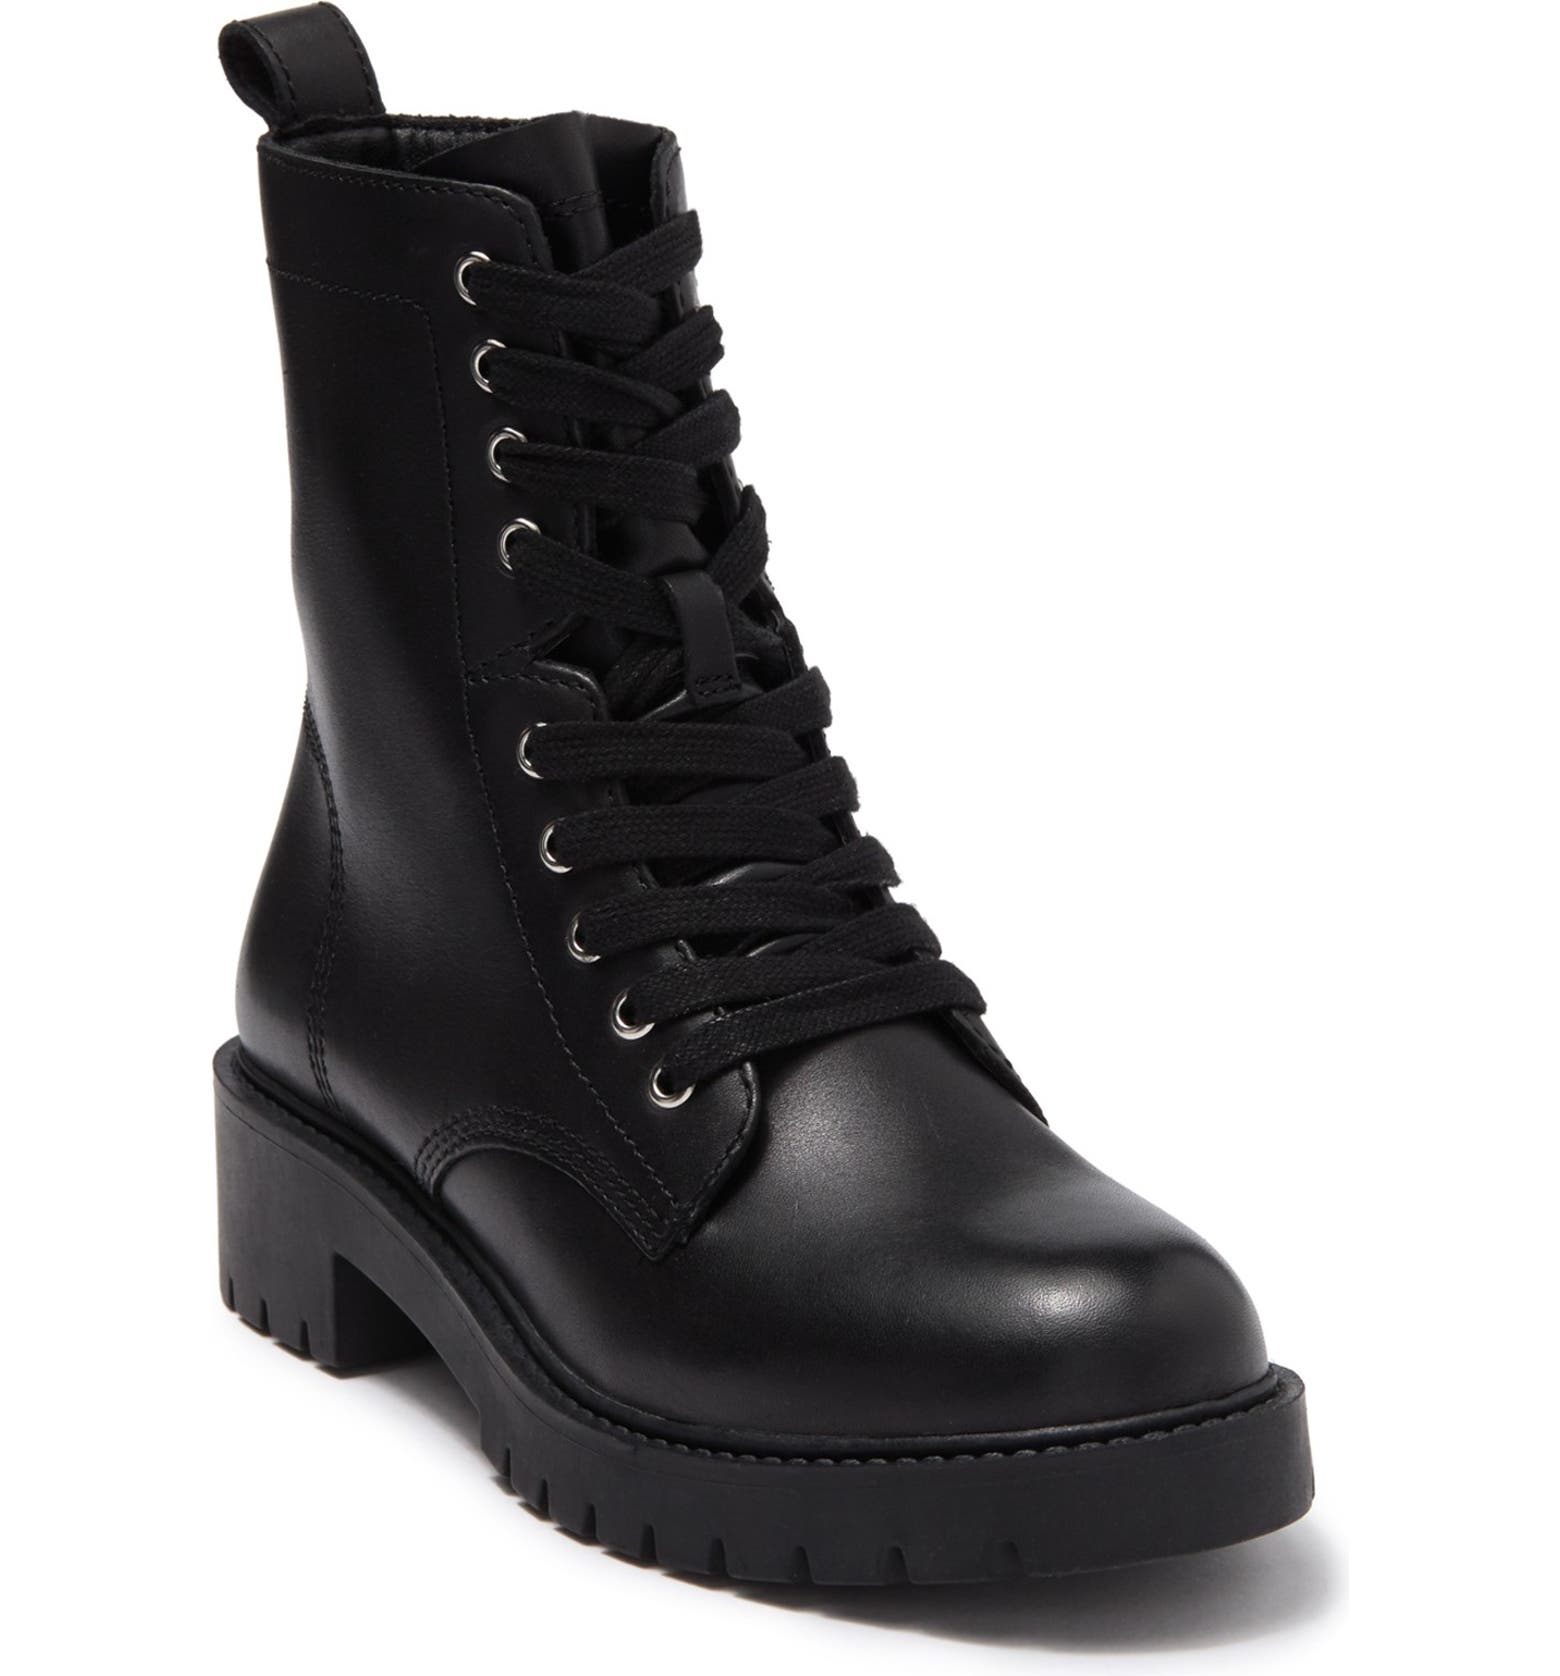 Buy Steve Madden Men's SELF Made Rockey Ankle Boot, Black Leather, 8.5 M US  at Amazon.in